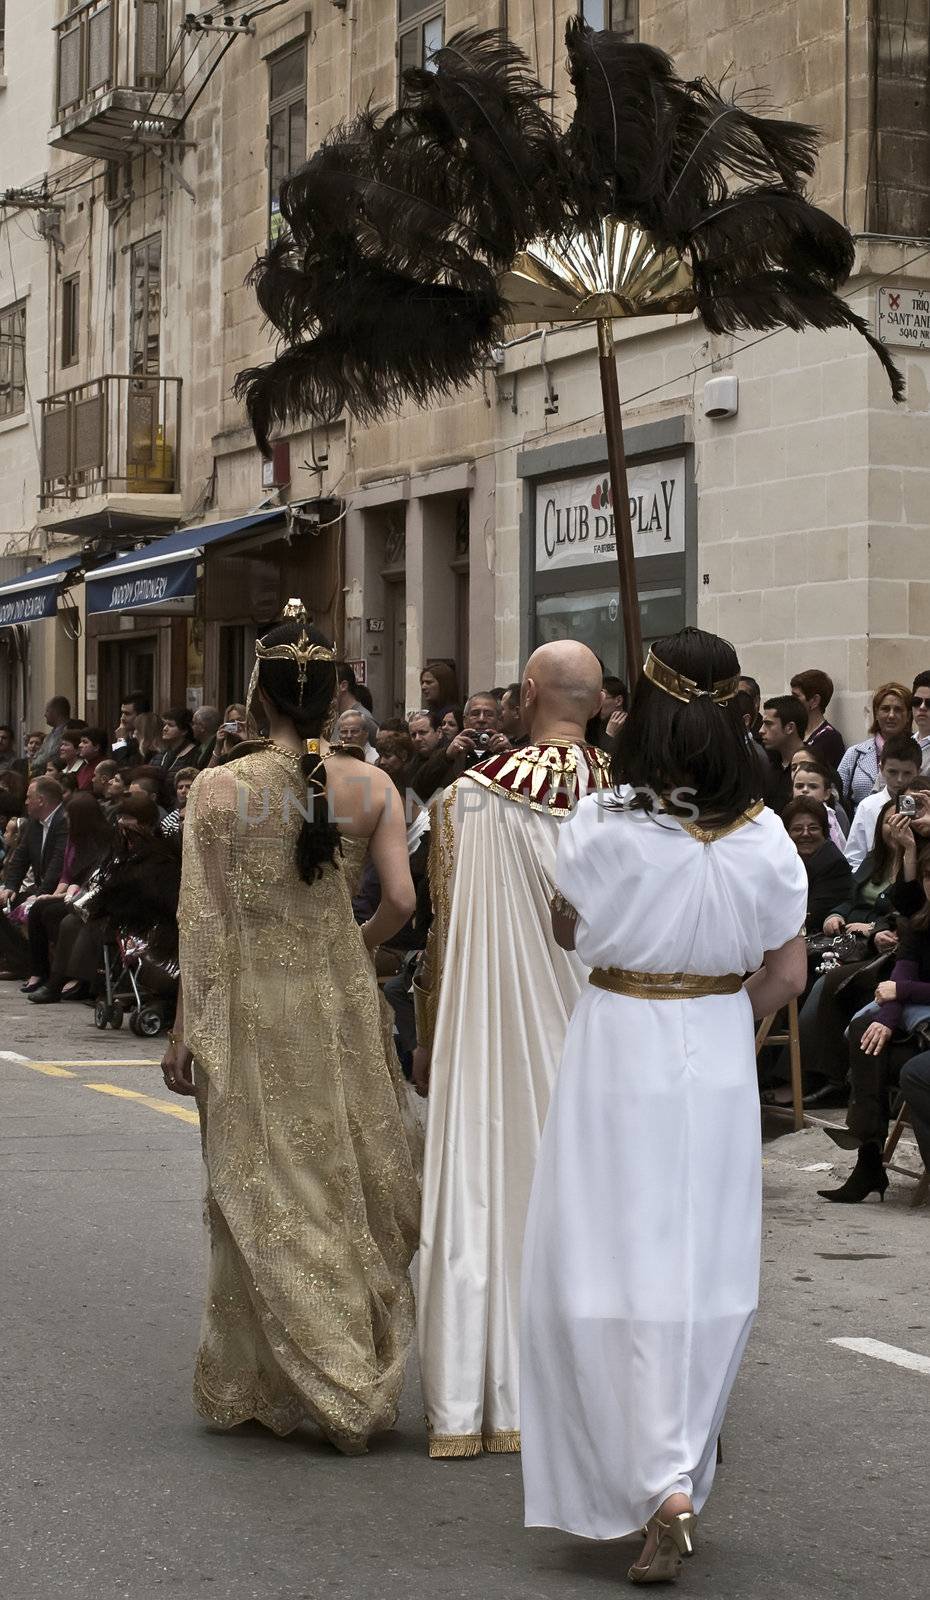 LUQA, MALTA - Friday 10th April 2009 - Egyptian princess during the Good Friday procession in Malta